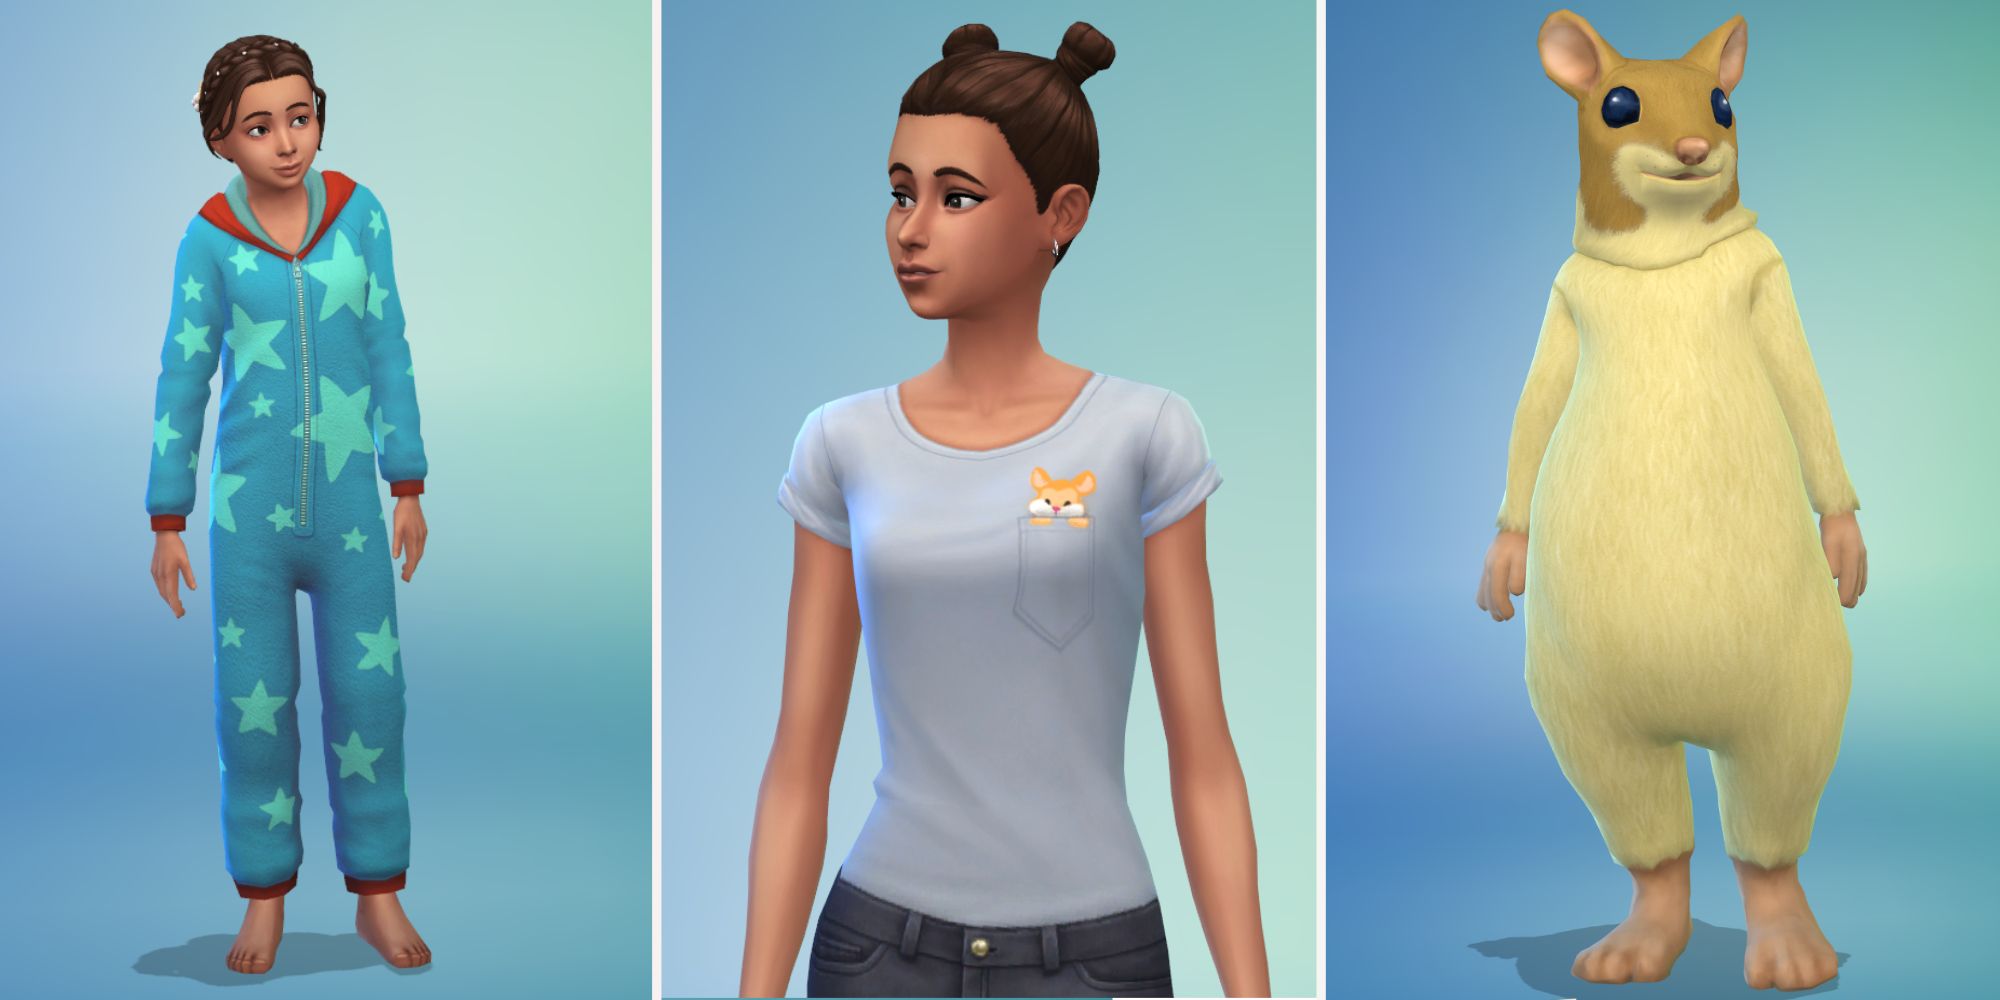 Sims 4 MFPS CAS items base game